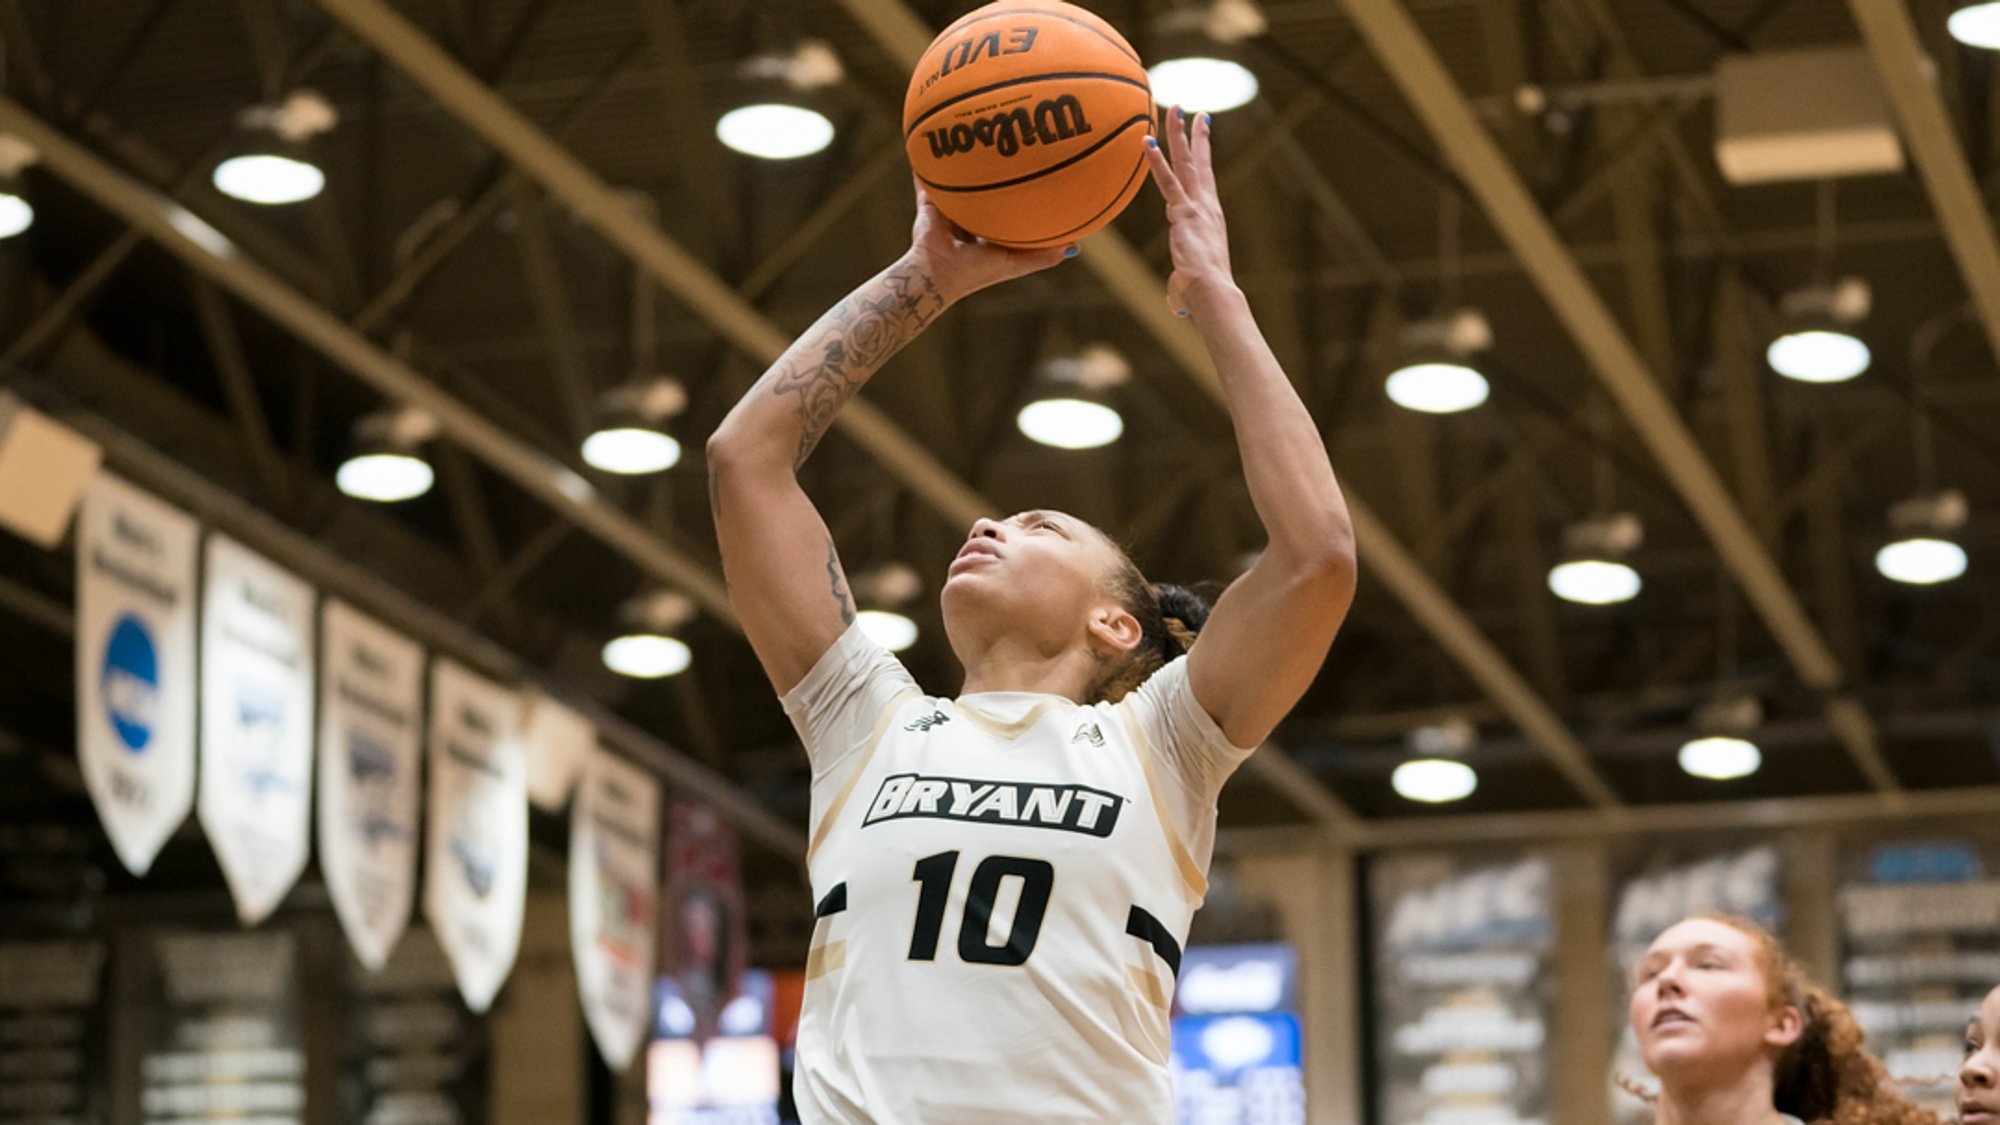 Reynolds' double-double lifts Bulldogs past UNH at home